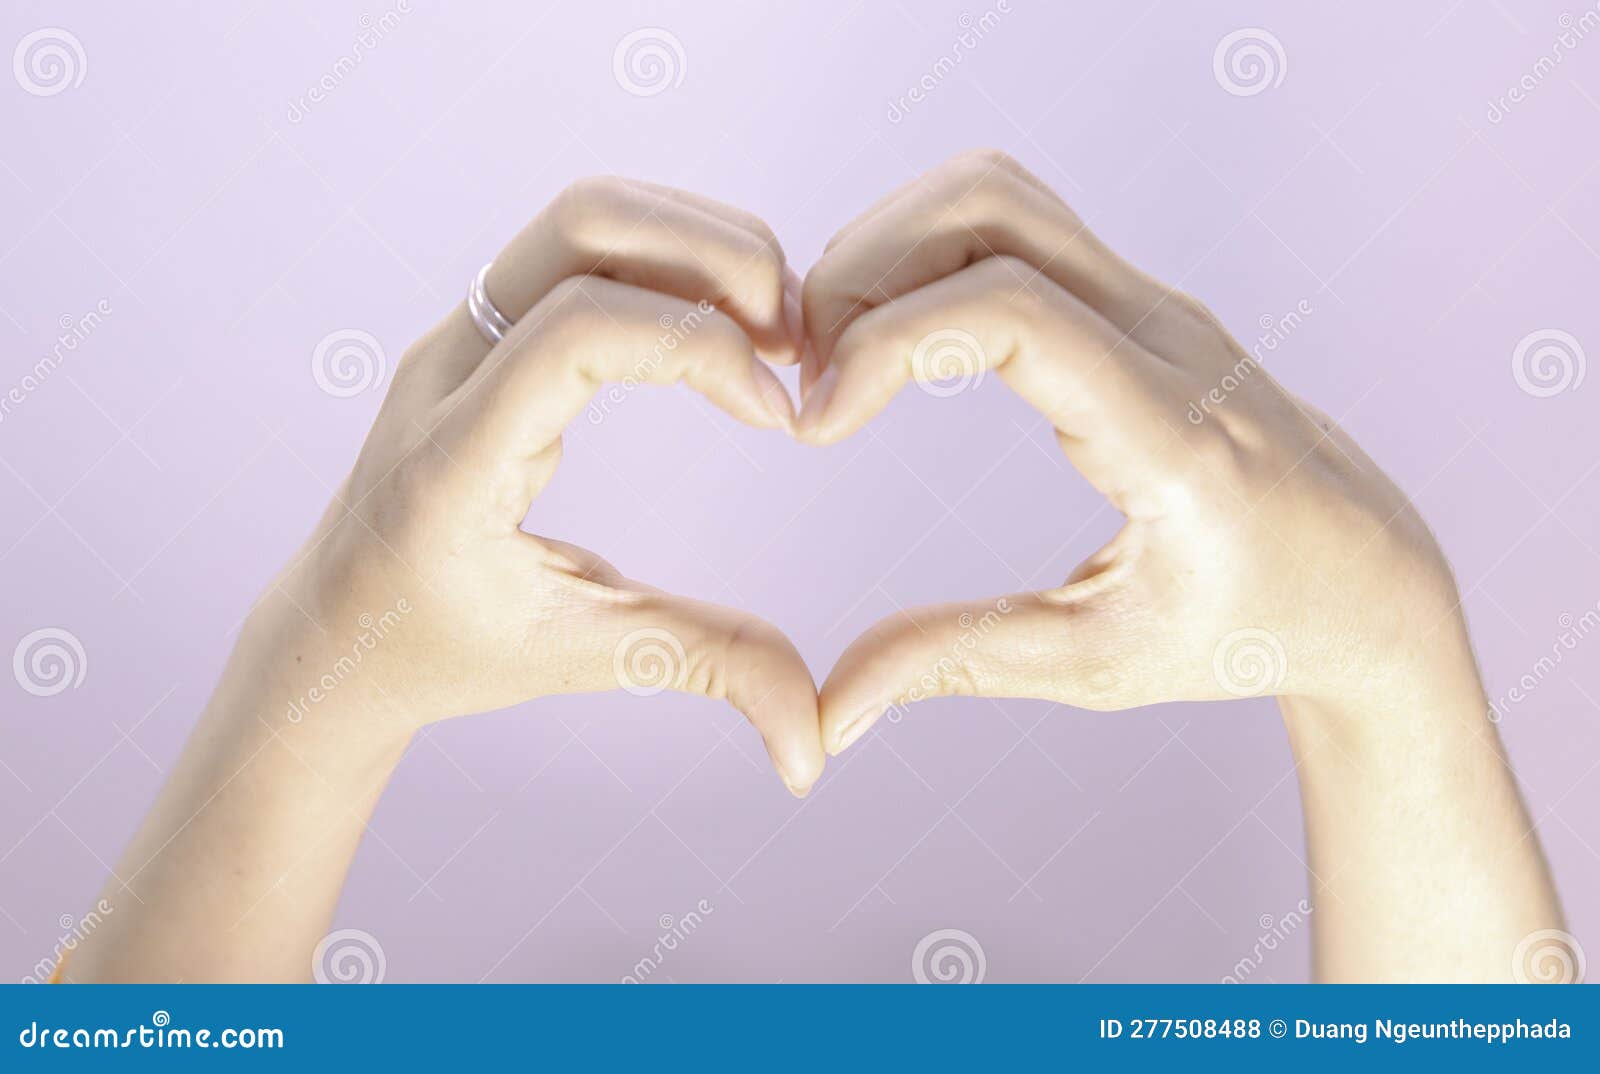 https://thumbs.dreamstime.com/z/femalehand-making-heart-shape-white-background-beautiful-woman-s-hand-copy-space-valentine-s-day-love-concept-femalehand-277508488.jpg